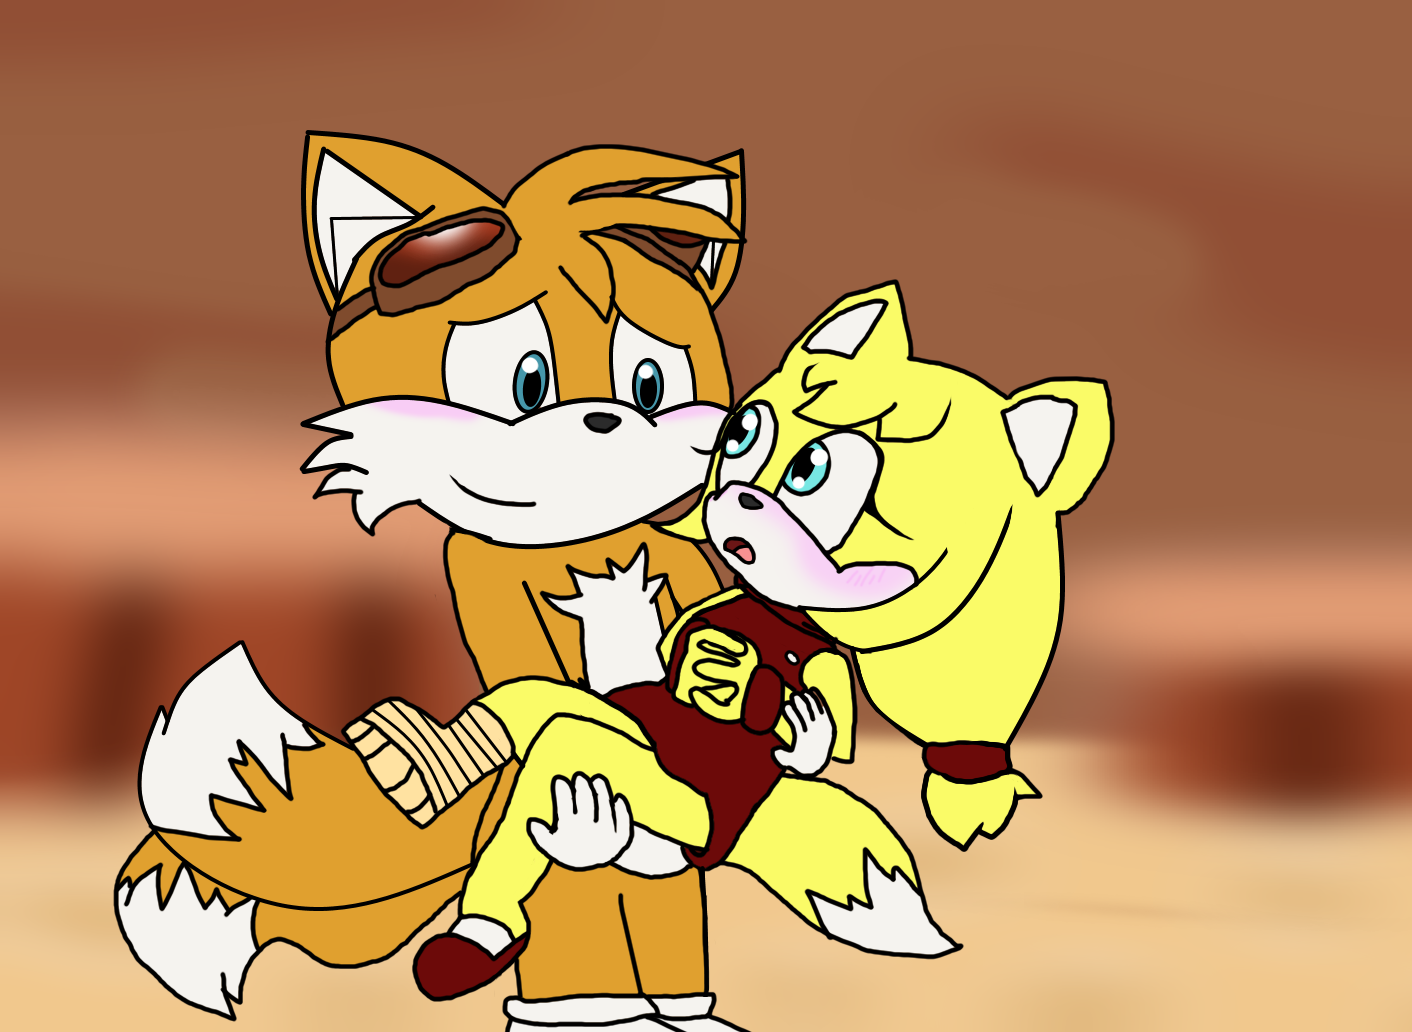 TAILS HAS GIRLFRIENDS?! - Tails and Zooey VS DeviantArt Part 2